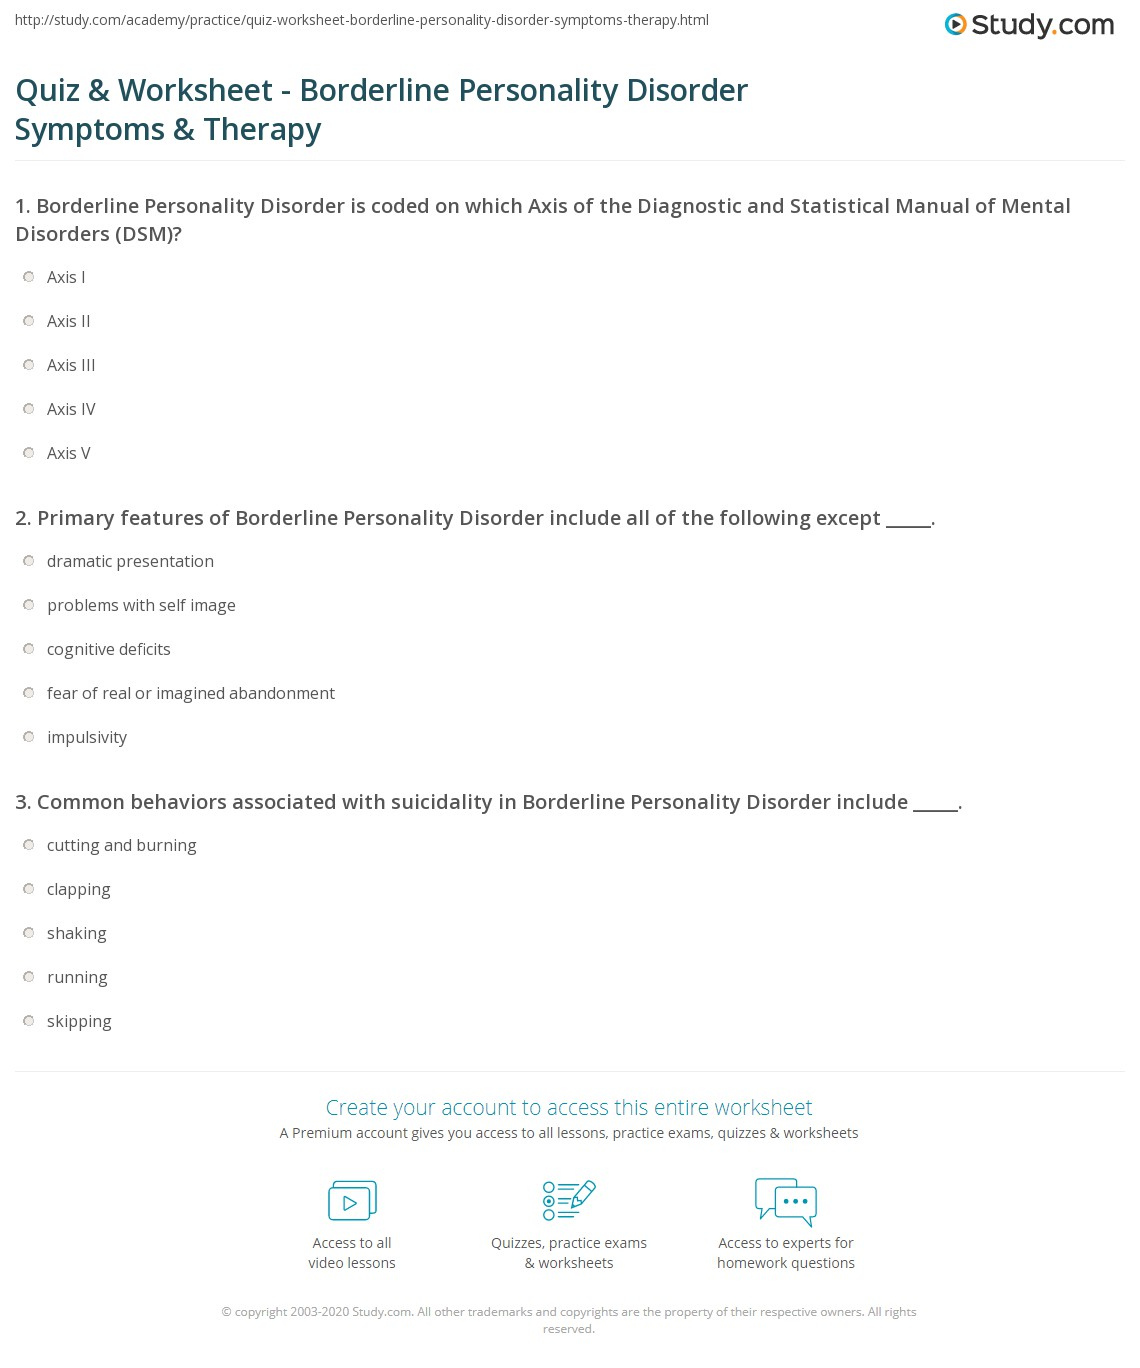 Quiz Worksheet Borderline Personality Disorder Symptoms Therapy 